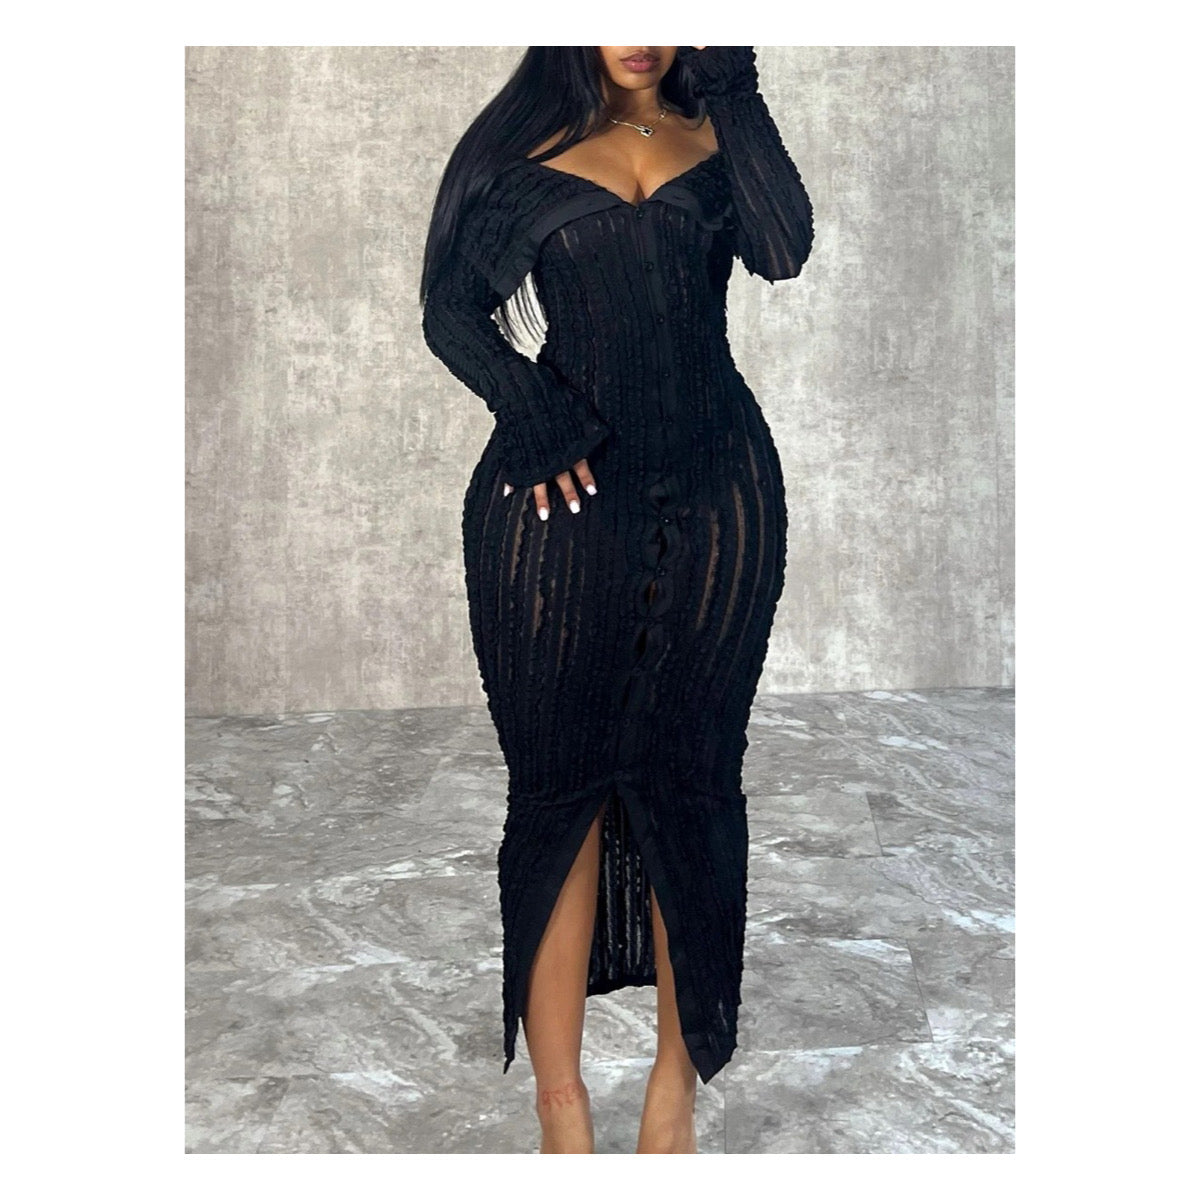 Mesh Off-the-Shoulder "Button Up" Maxi Dress - Elegant Eveningwear for Special Occasions